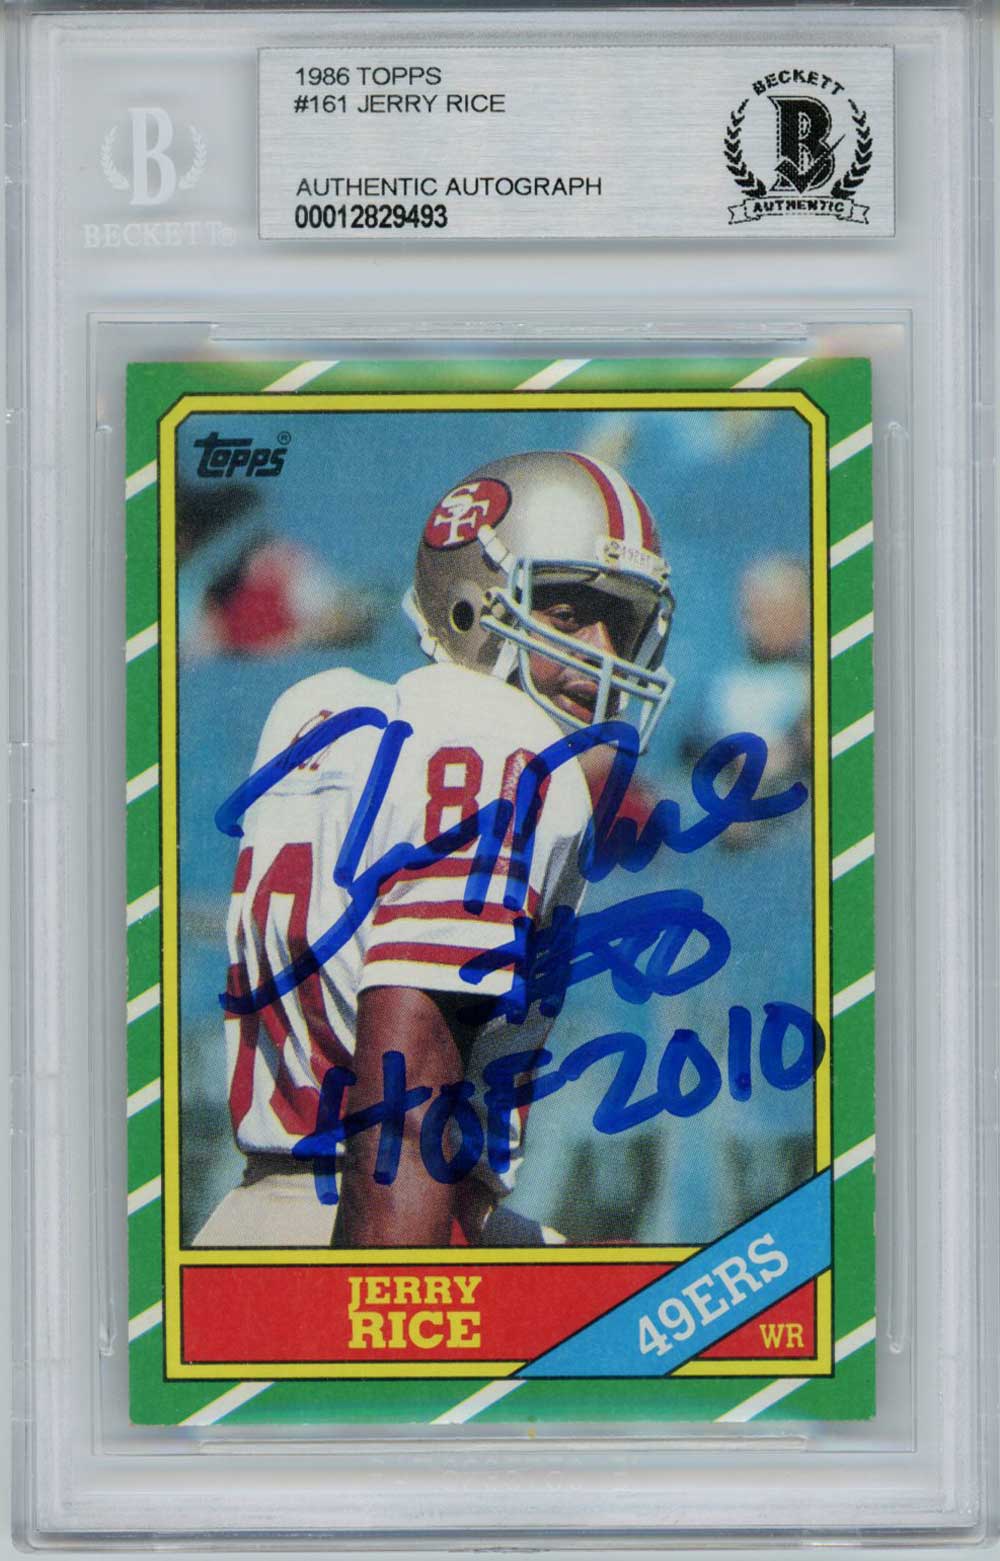 Jerry Rice Autographed/Signed 49ers 1986 Topps #161 Rookie Card BAS Slab 31396